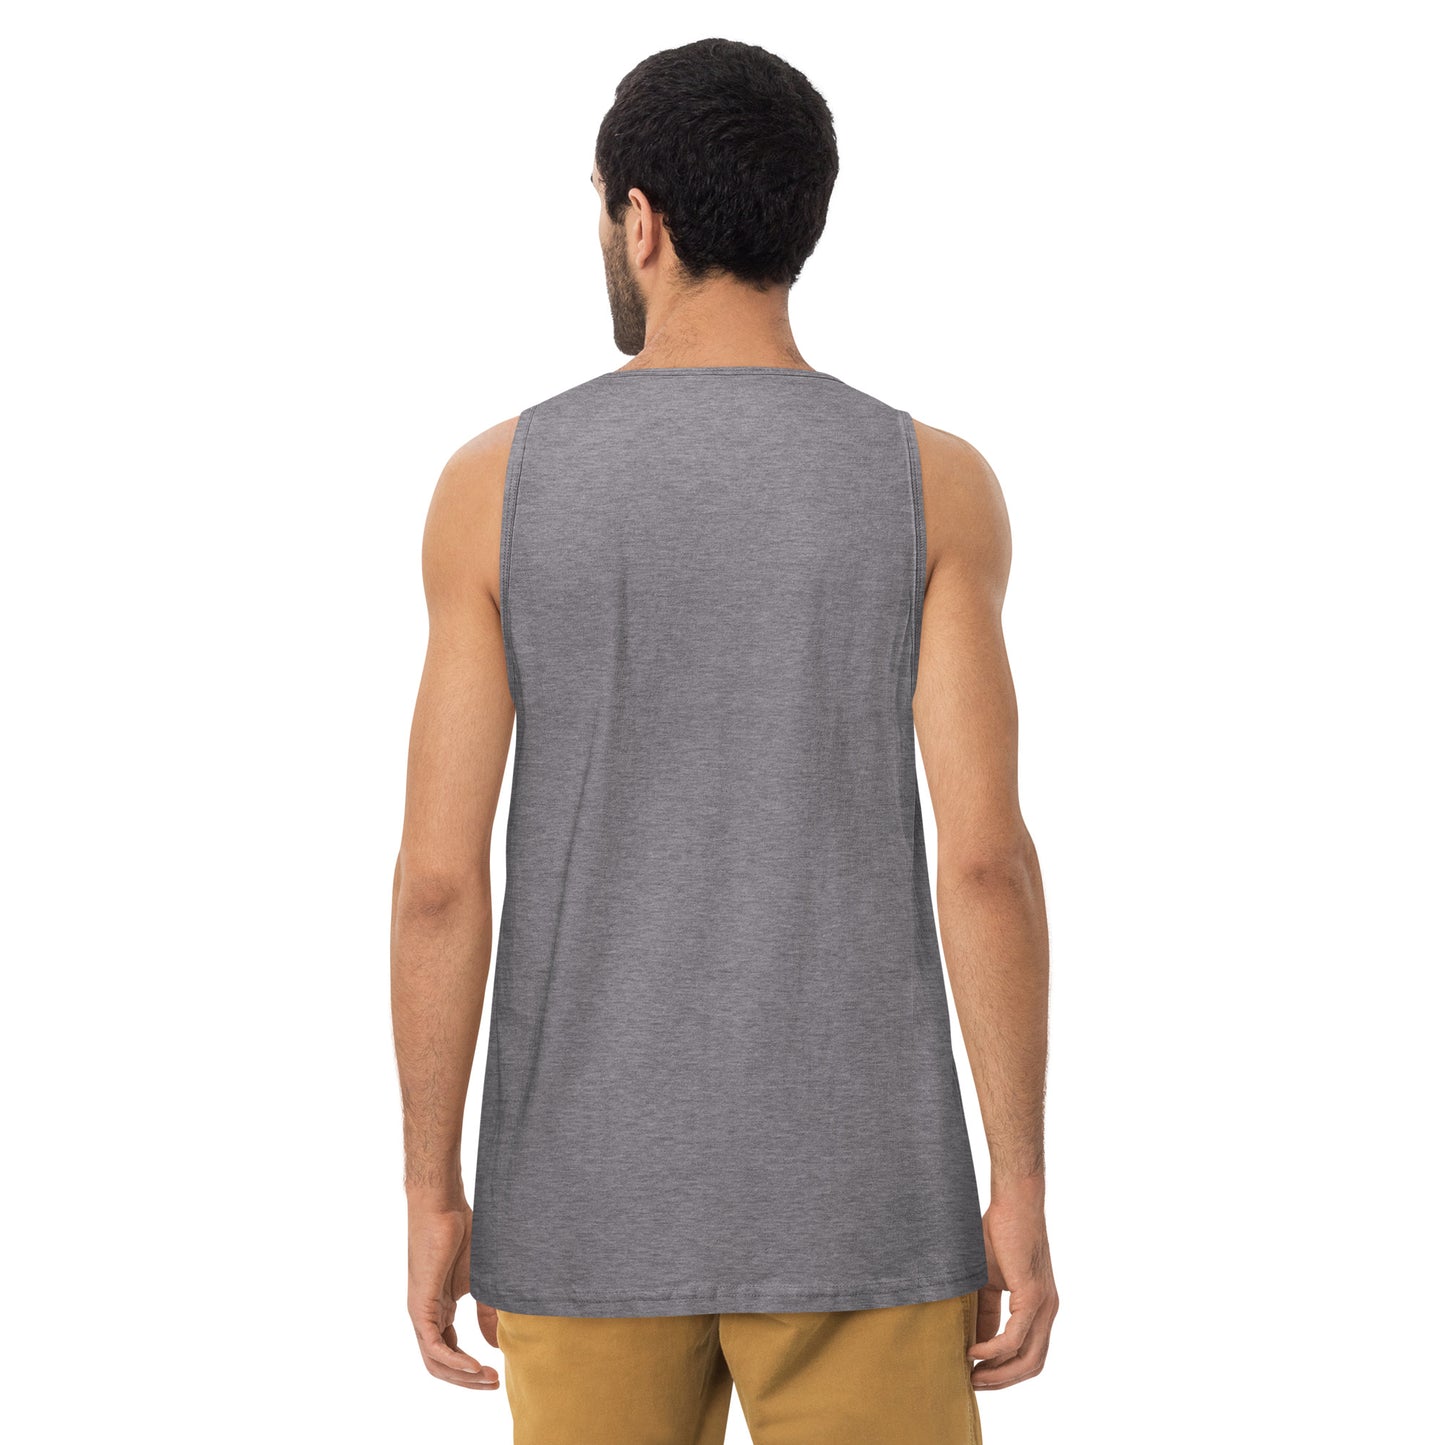 "Only on Main Street" (Local Businesses) Men’s Premium Tank Top